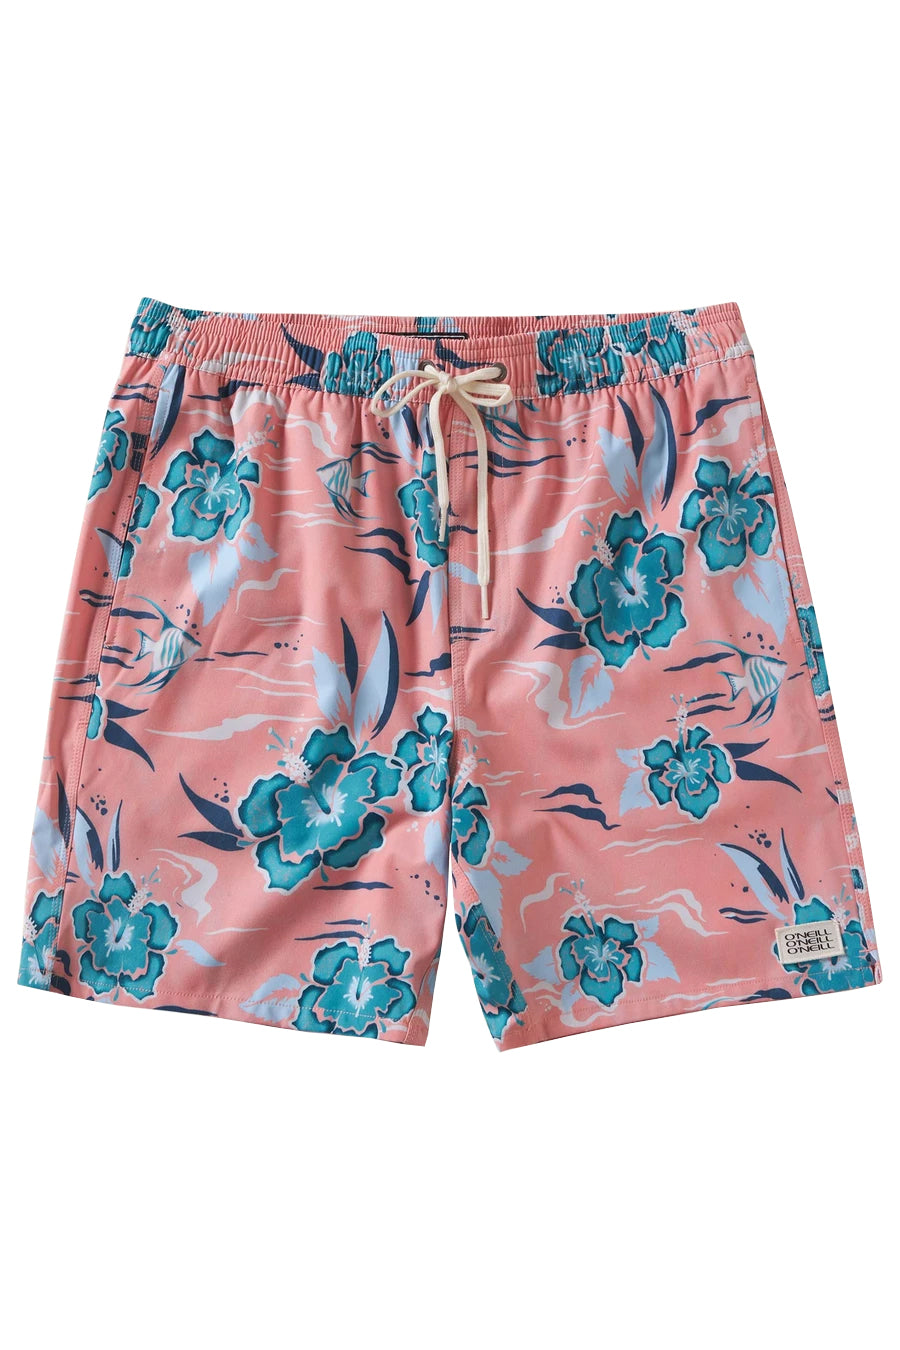 O'neill Mixed Up 17" Volley Boardshorts LCO-Light Coral L